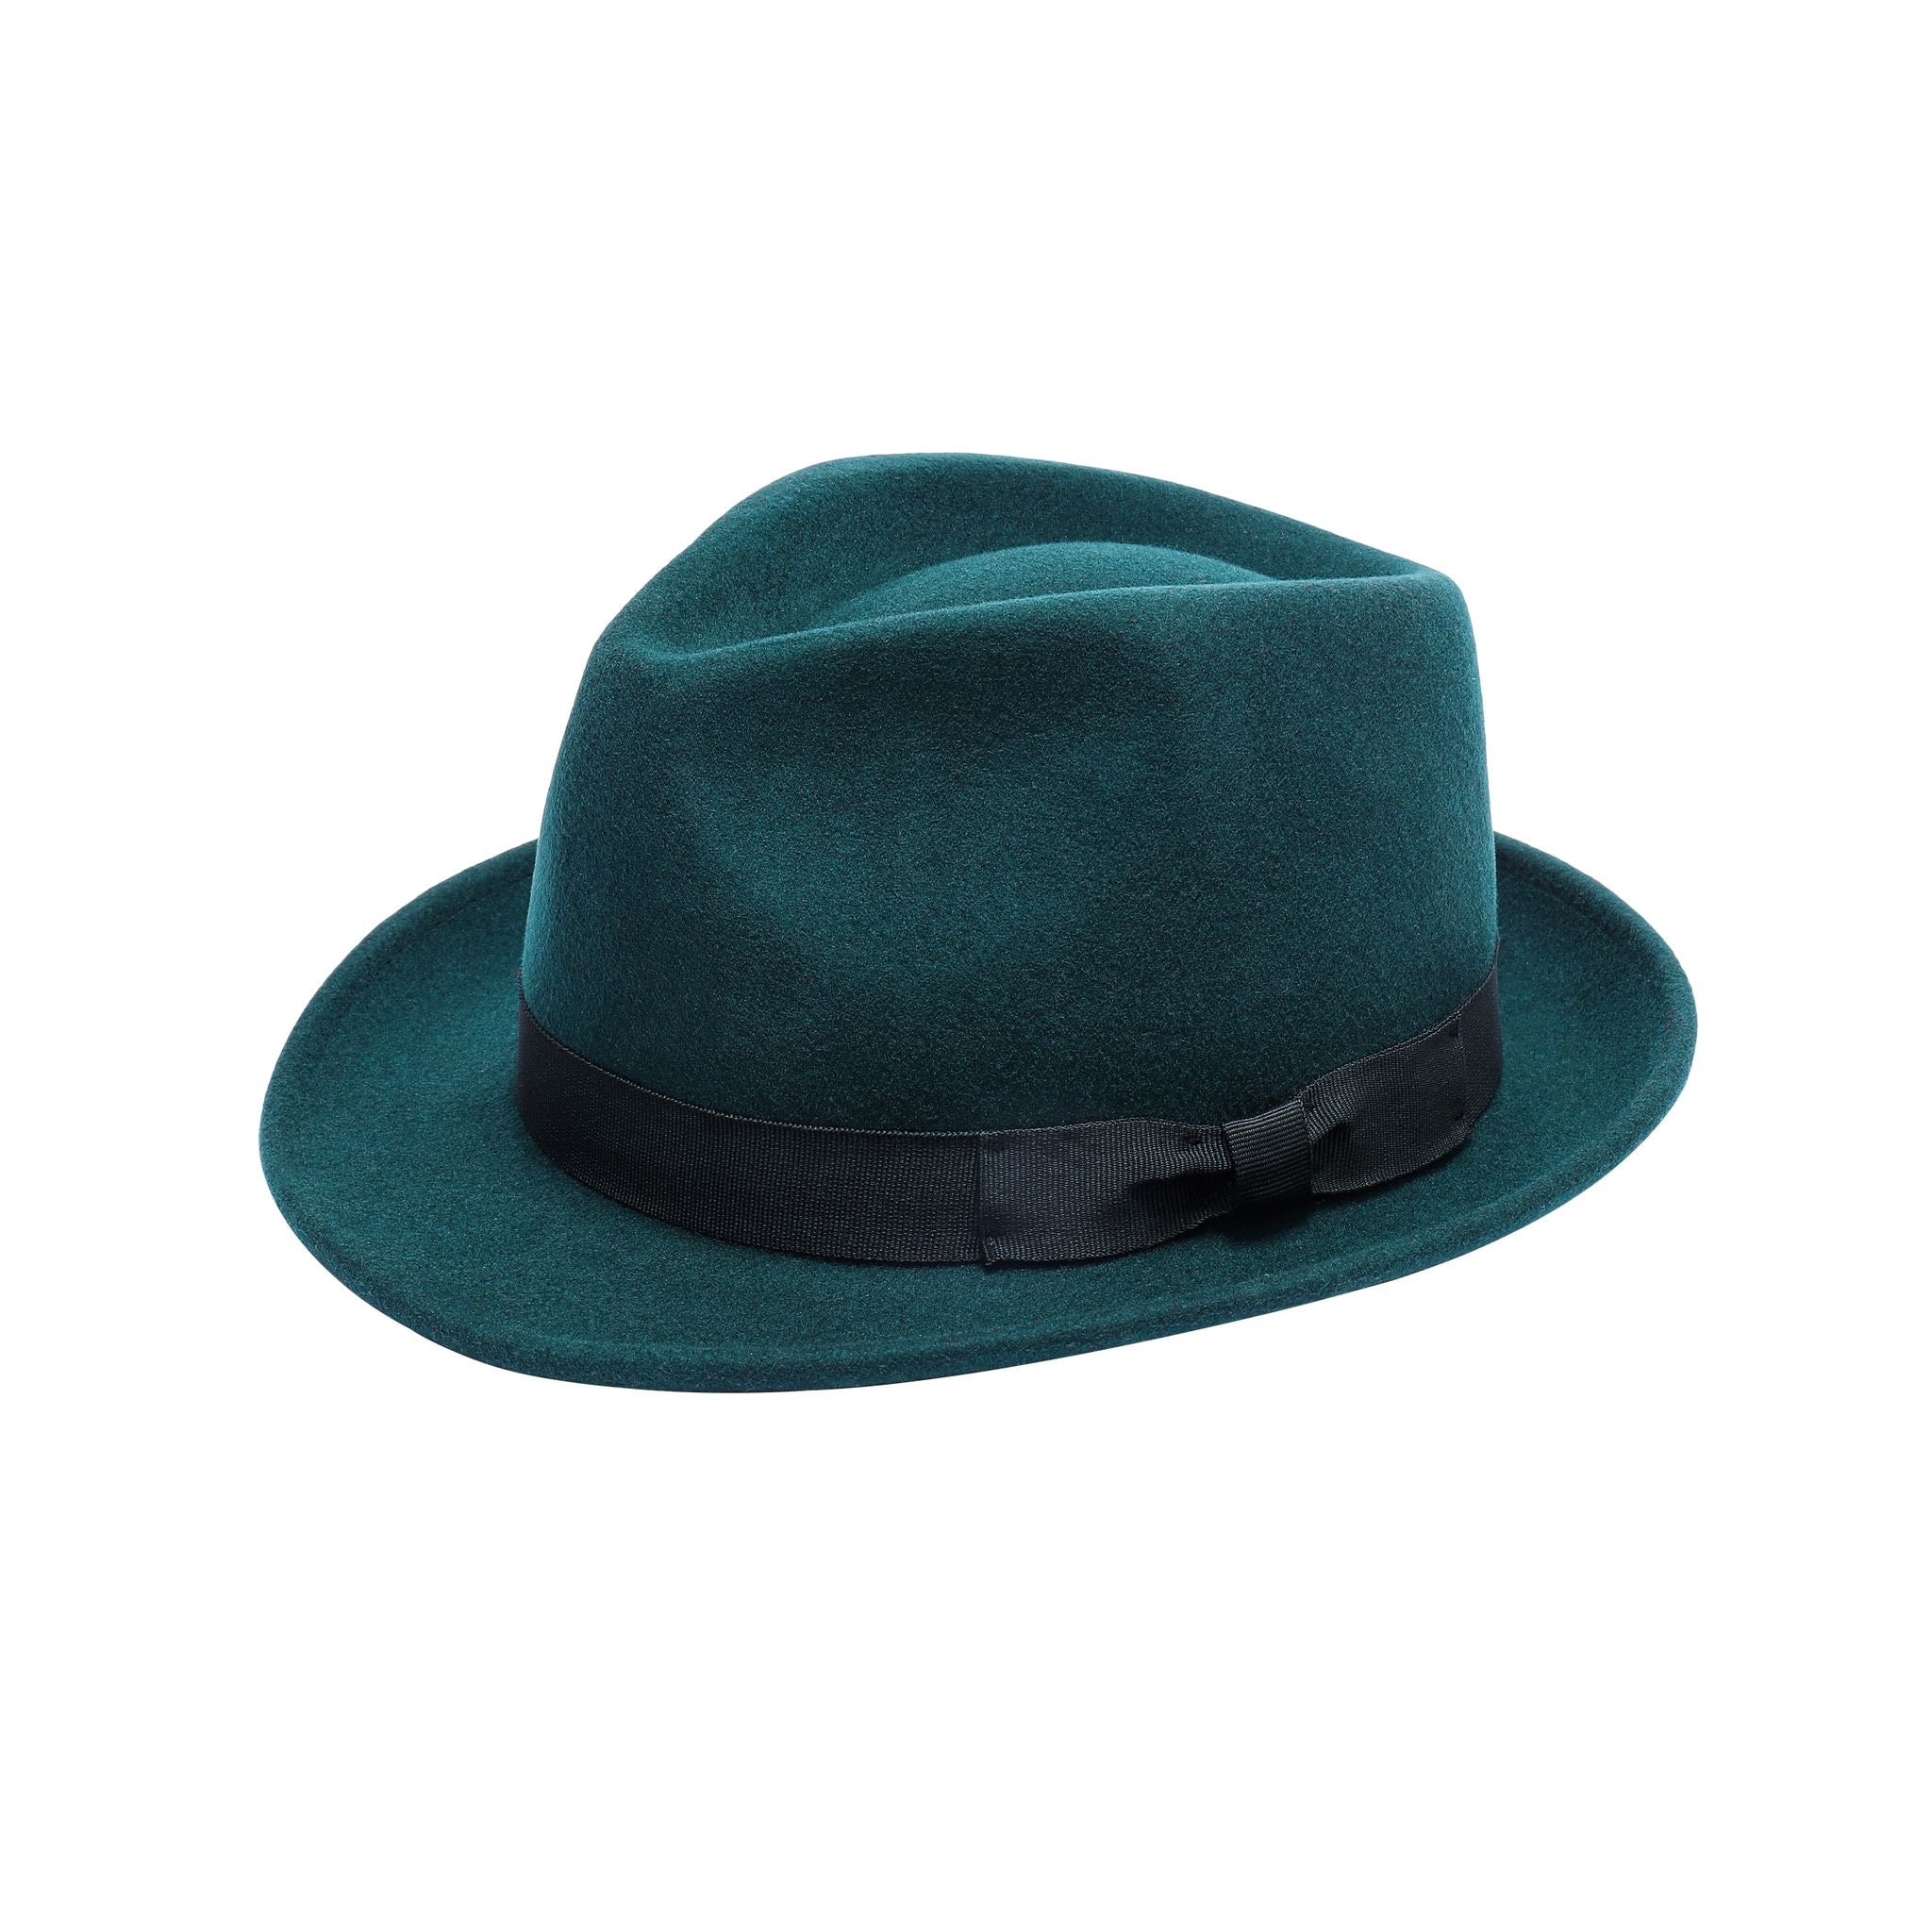 Fedora Hat - Winter Fashion Hat For Men and Women Upturn and Classic